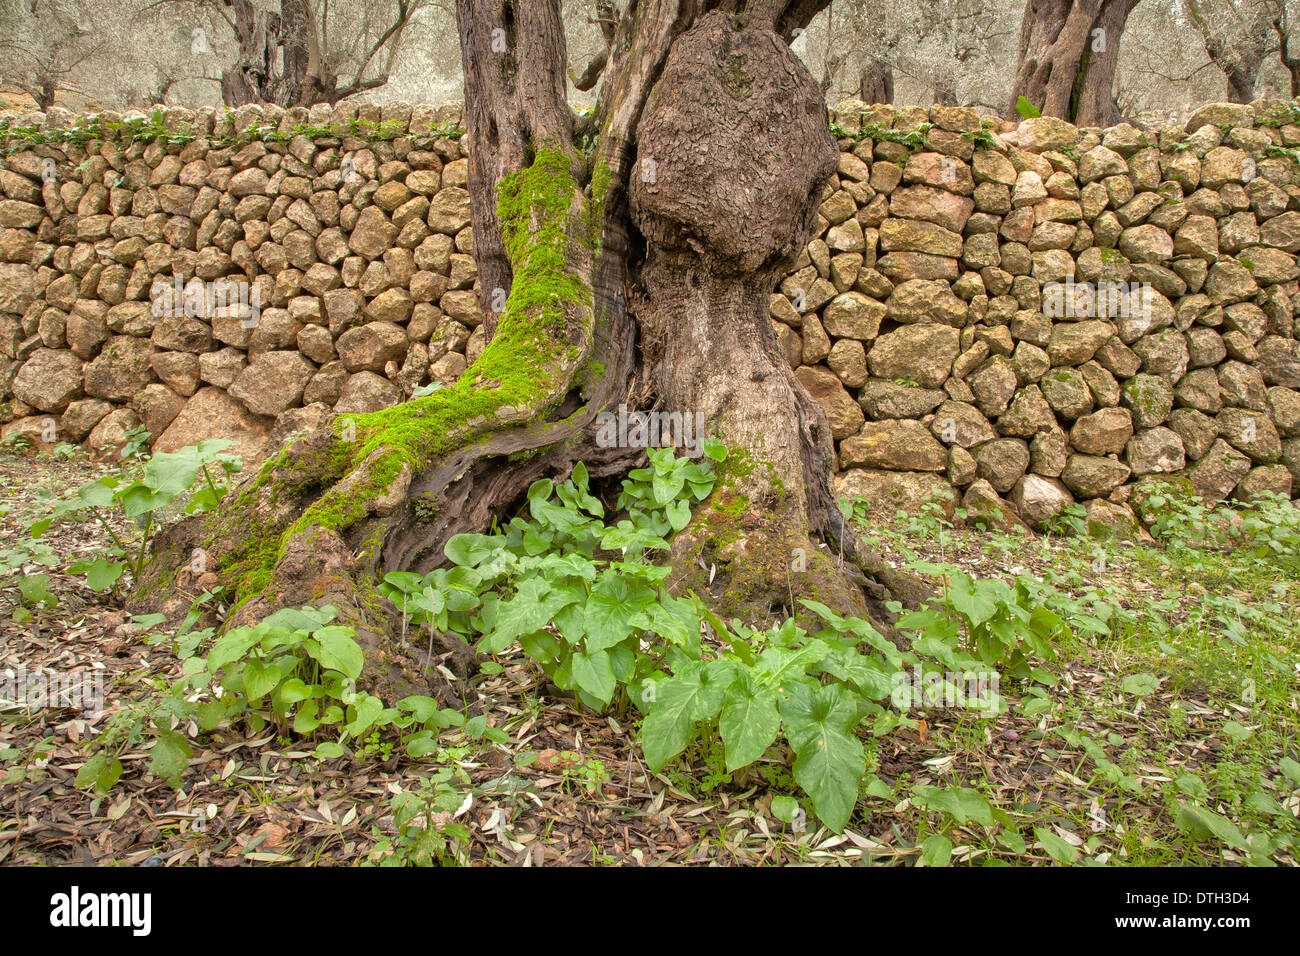 Olive tree with some moss on cultivation terrace. Tramuntana mountains. Sóller area. Majorca, Balearic islands, Spain Stock Photo